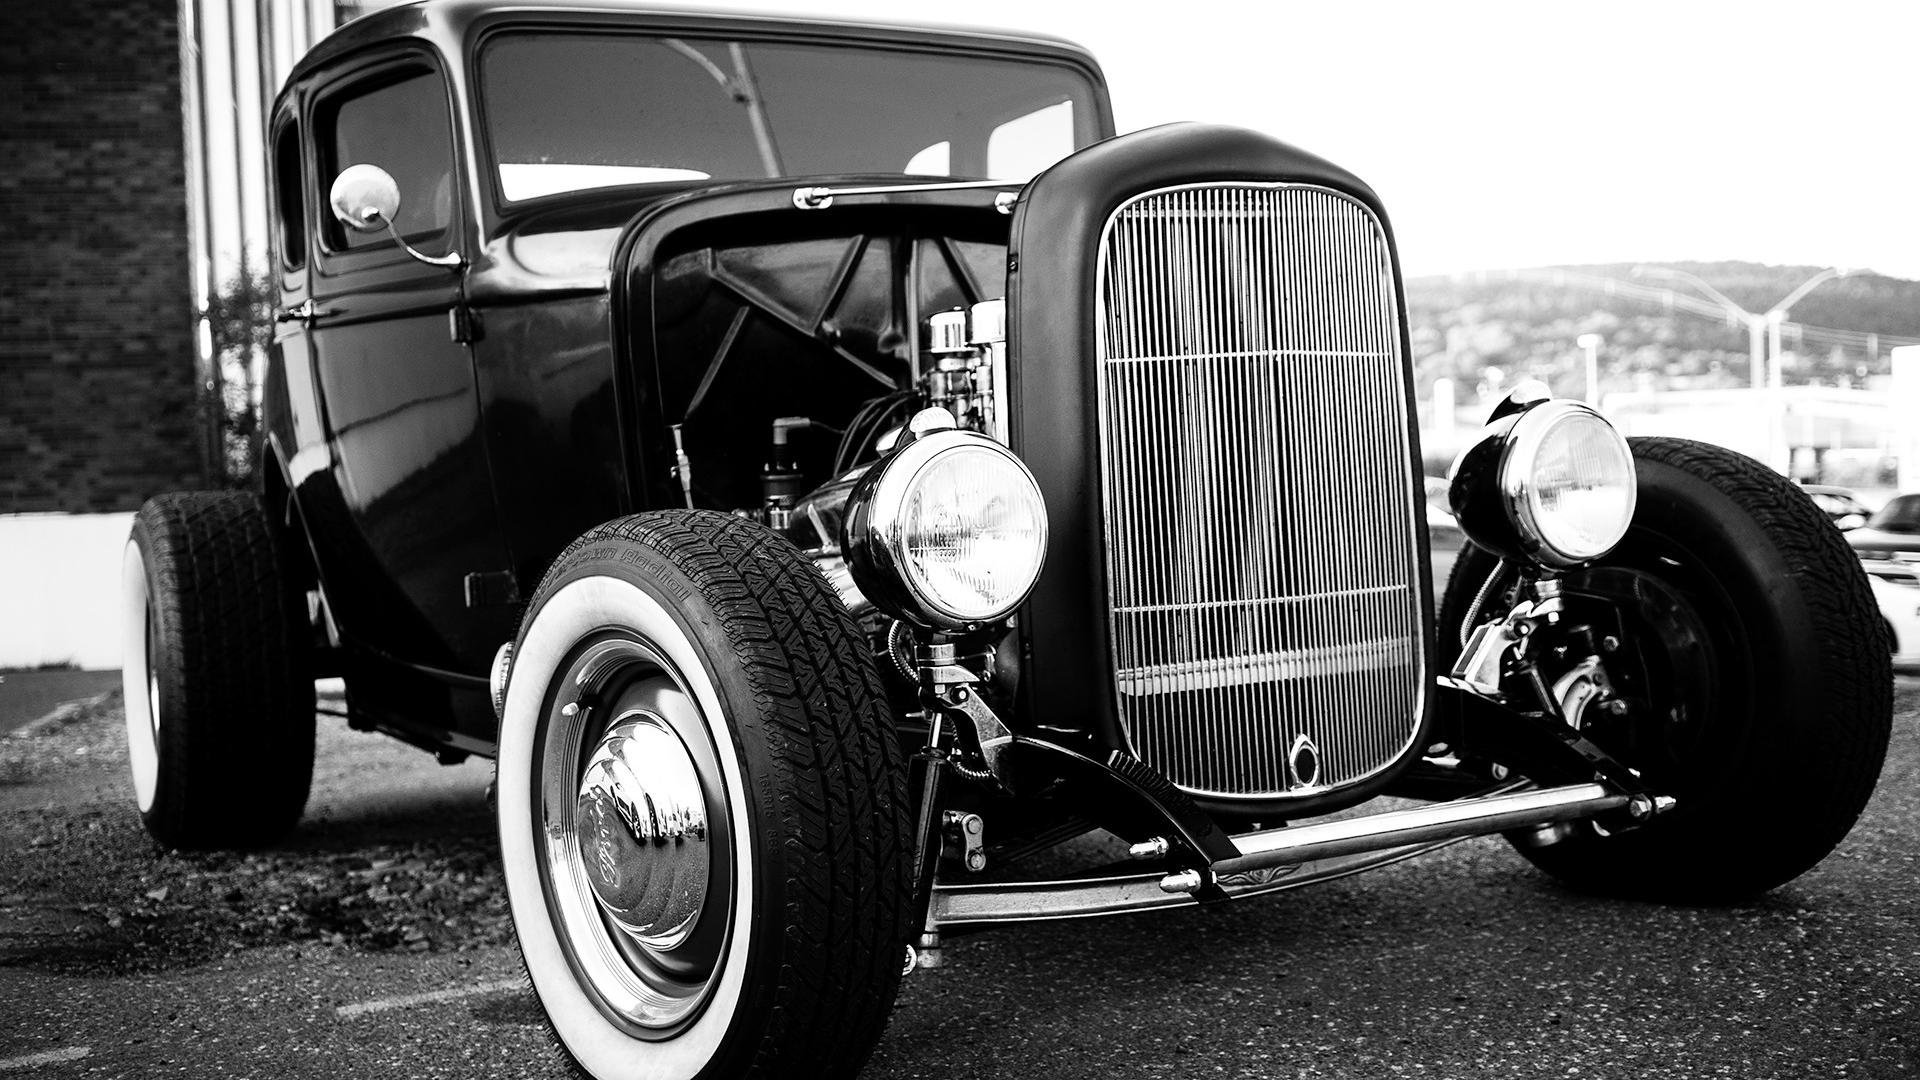 Rod black  and white  classic cars engine  wallpaper  46530 